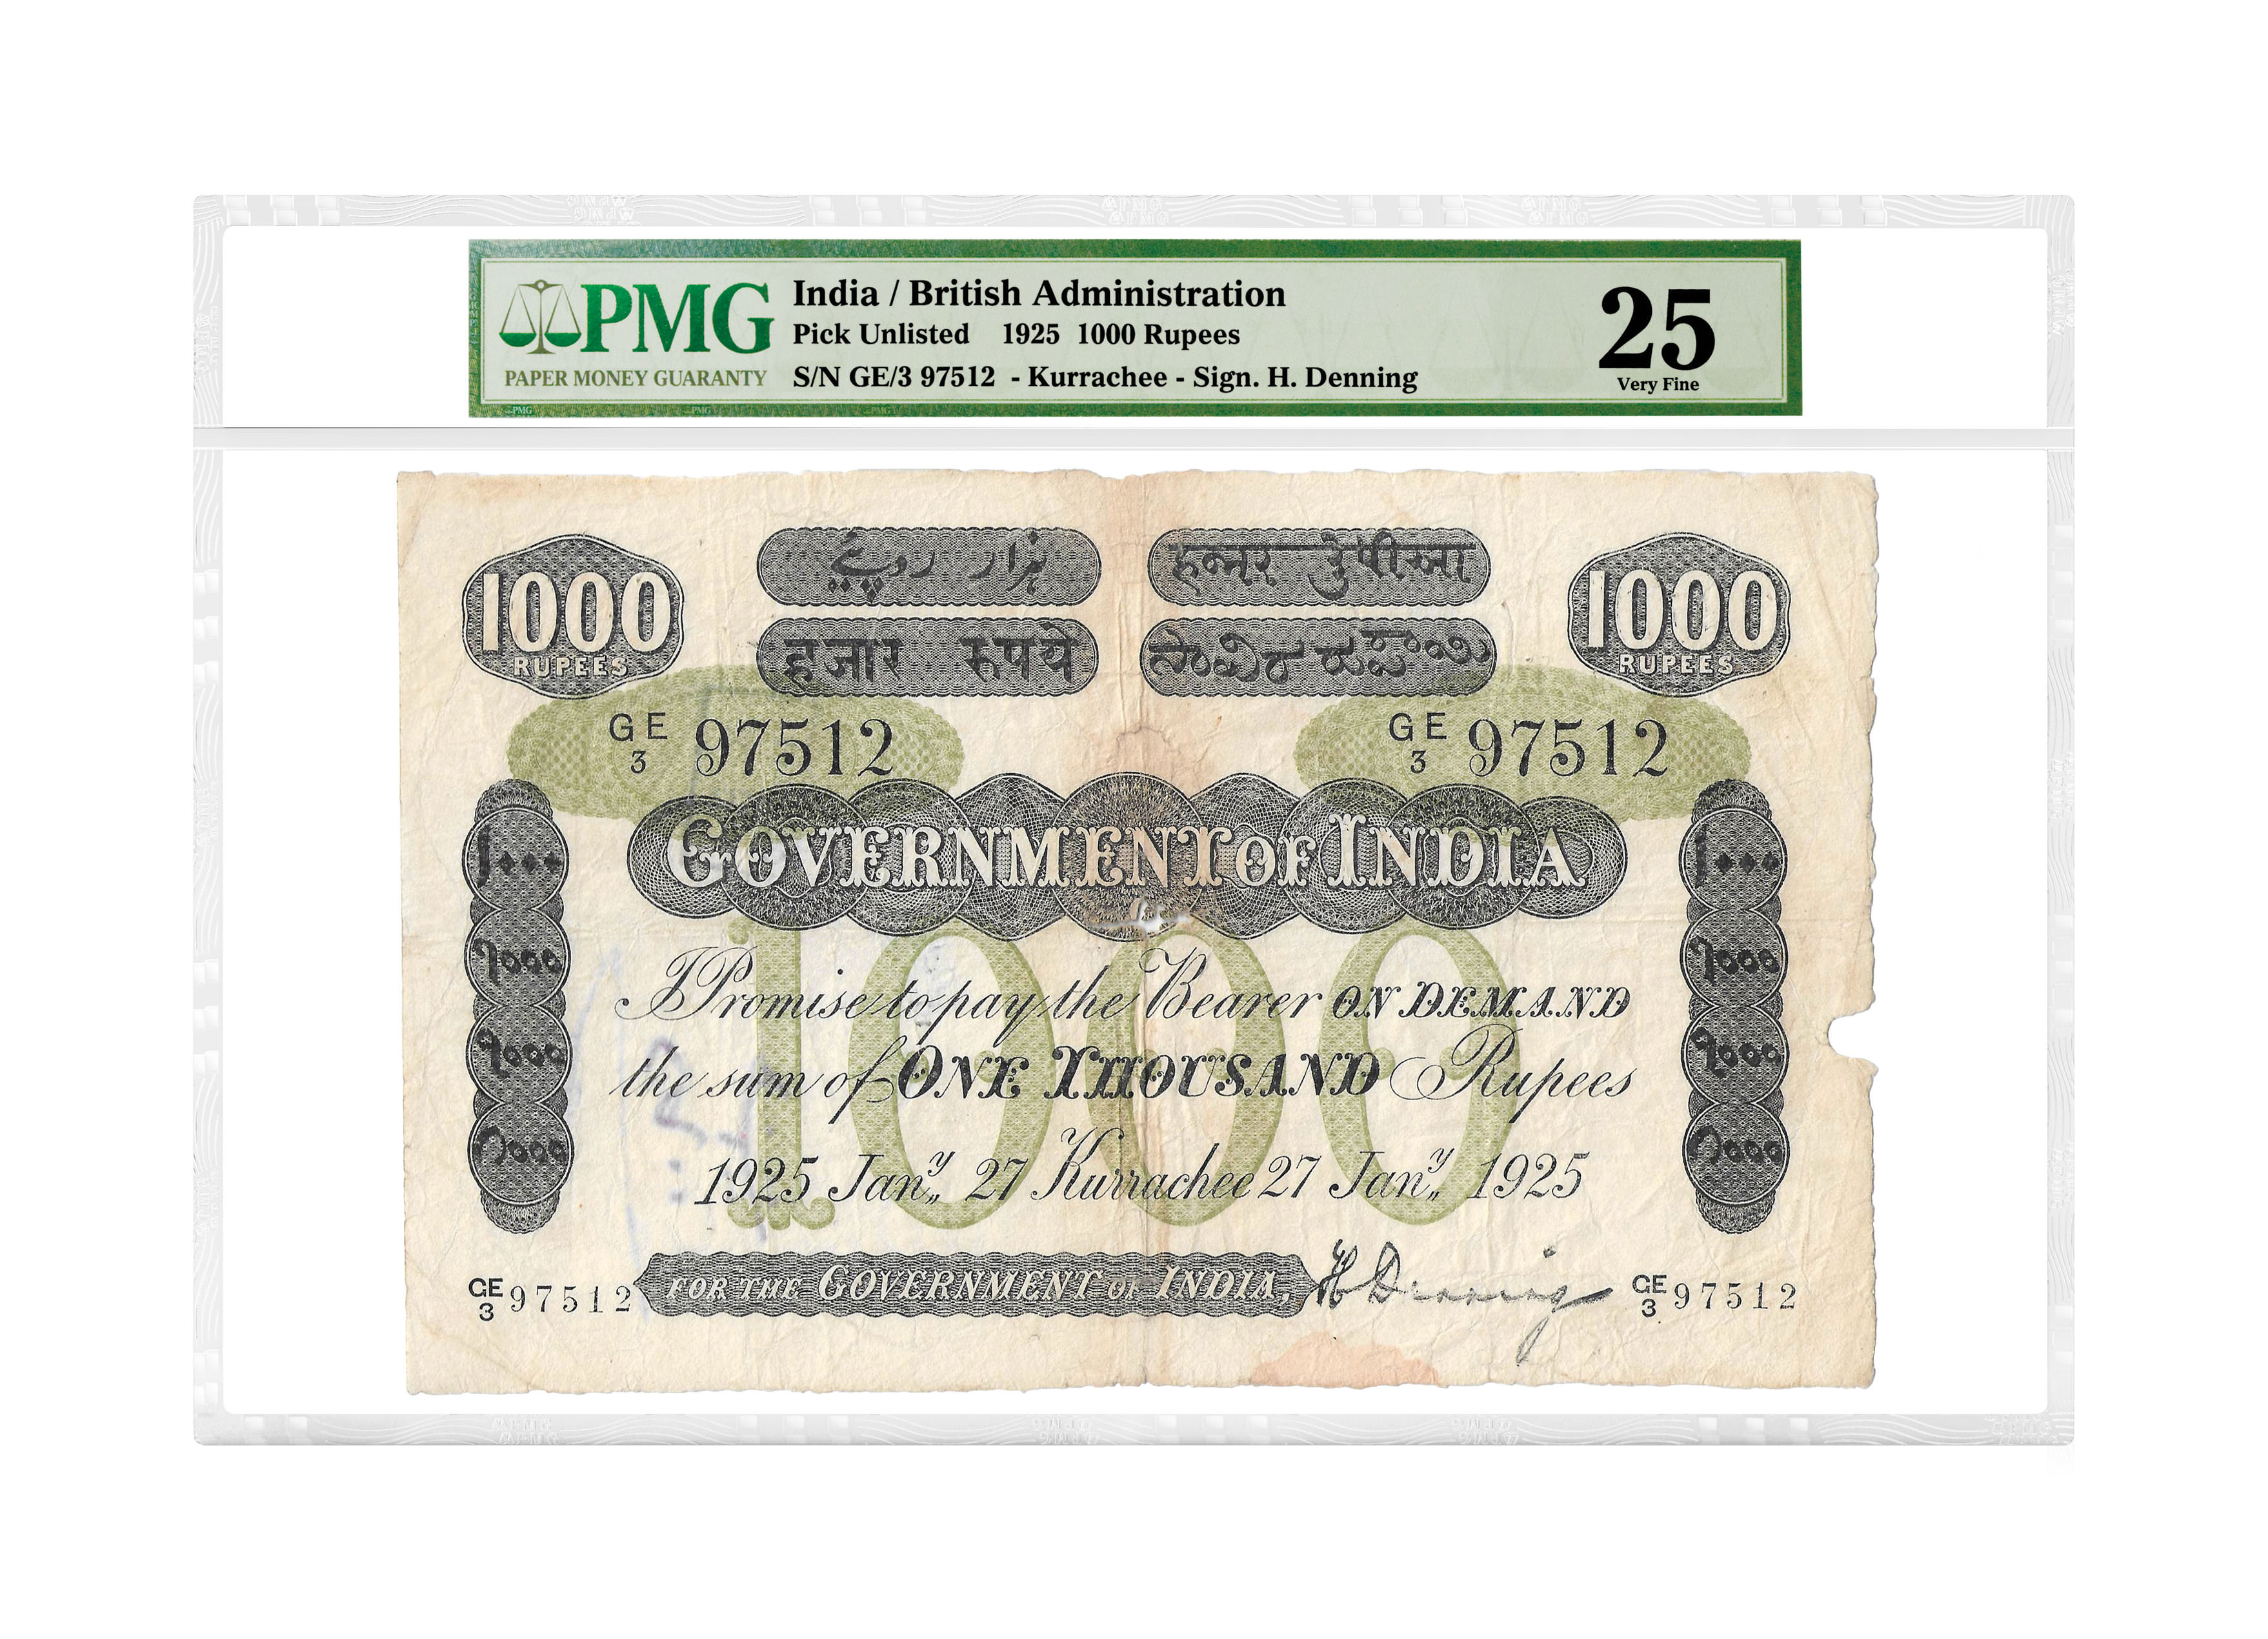 enlarged image for PMG Certifies India Discovery Note at Hong Kong Event